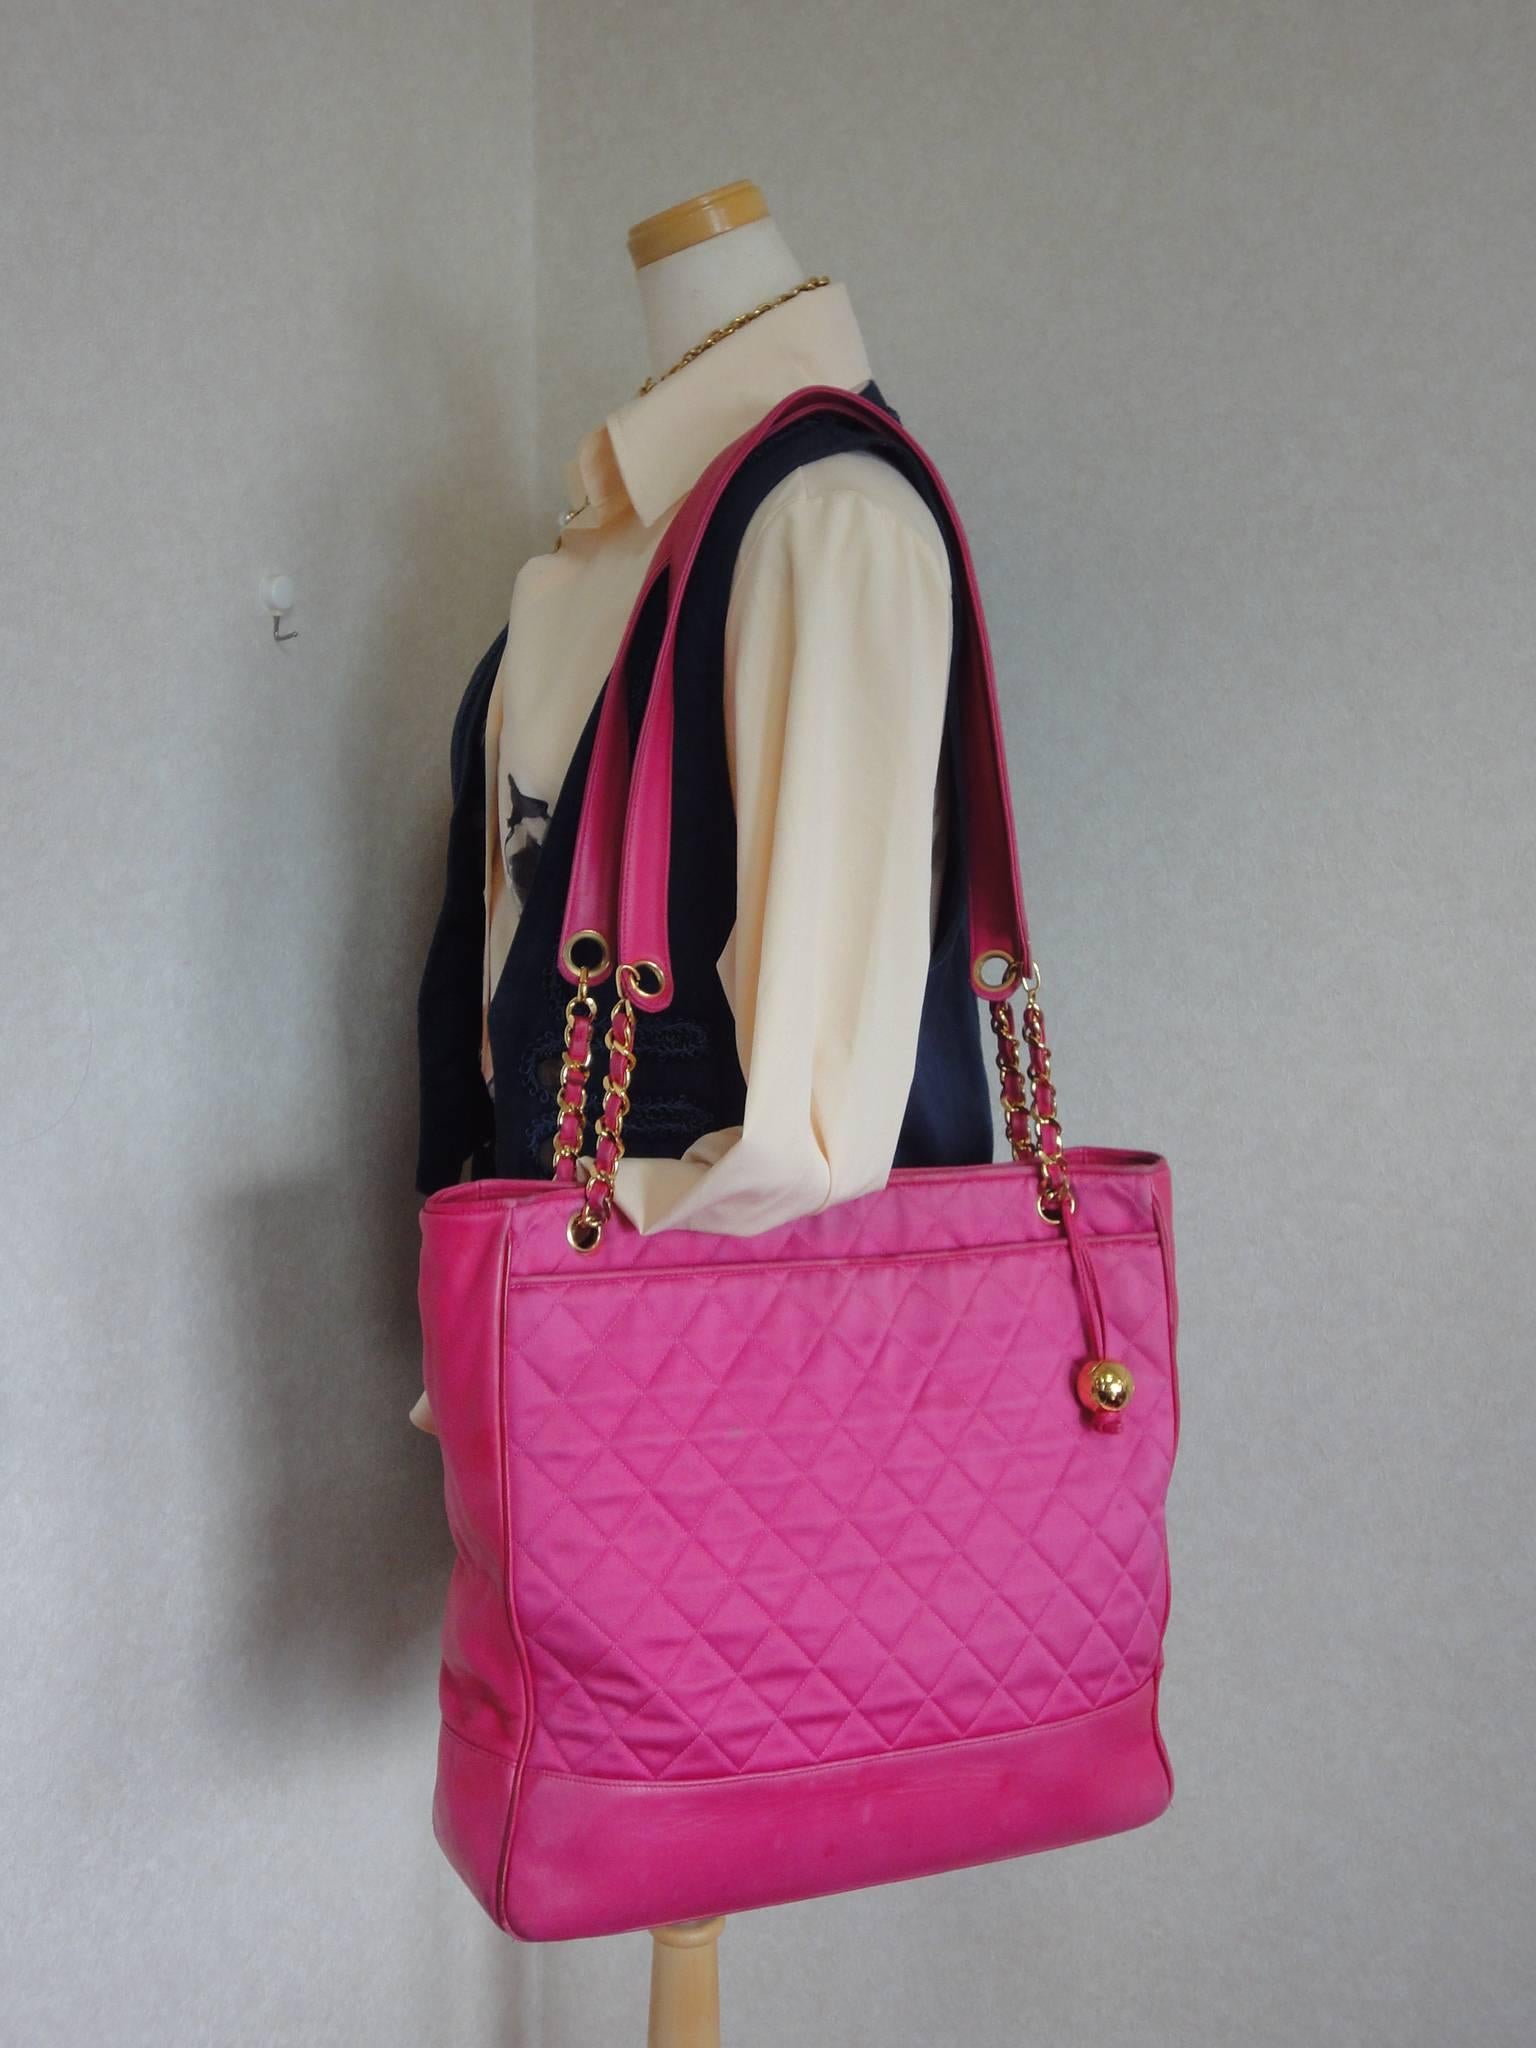 Vintage CHANEL bright pink shoulder tote bag with quilted satin and leather 5